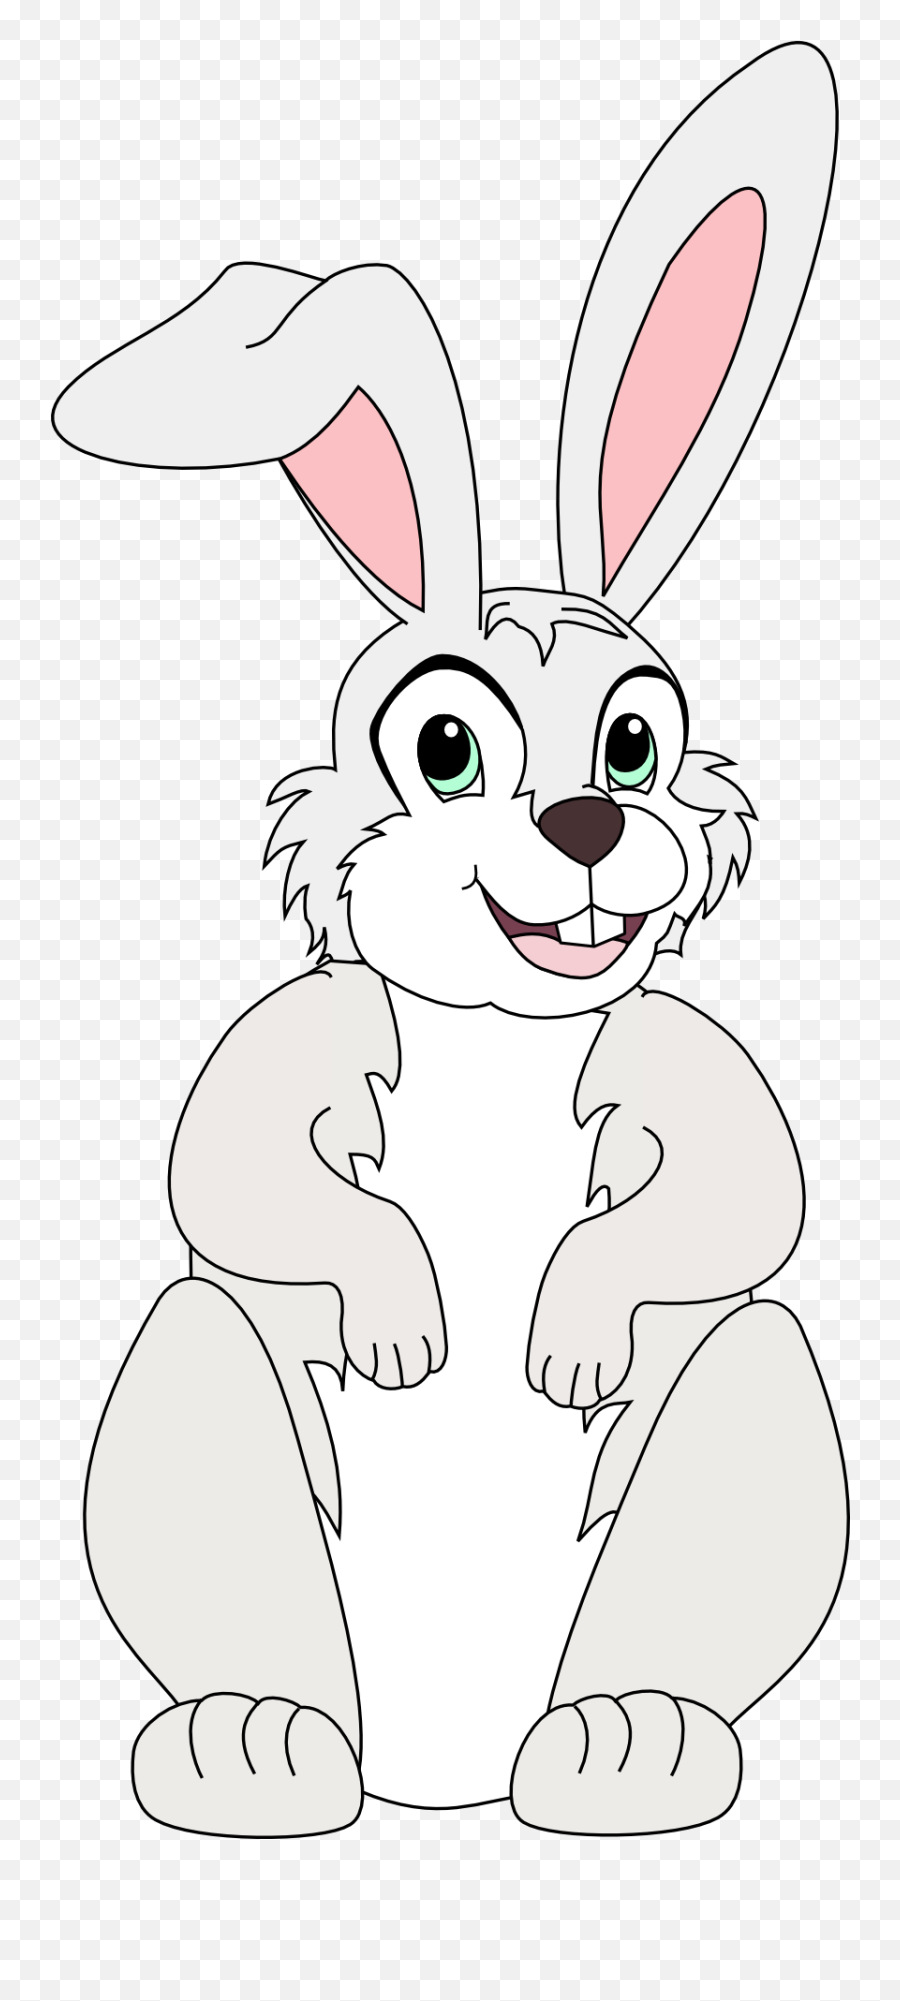 Grey Easter Bunny Clipart Free Image Download Emoji,Easter Bunny Coloring Pages Emotions